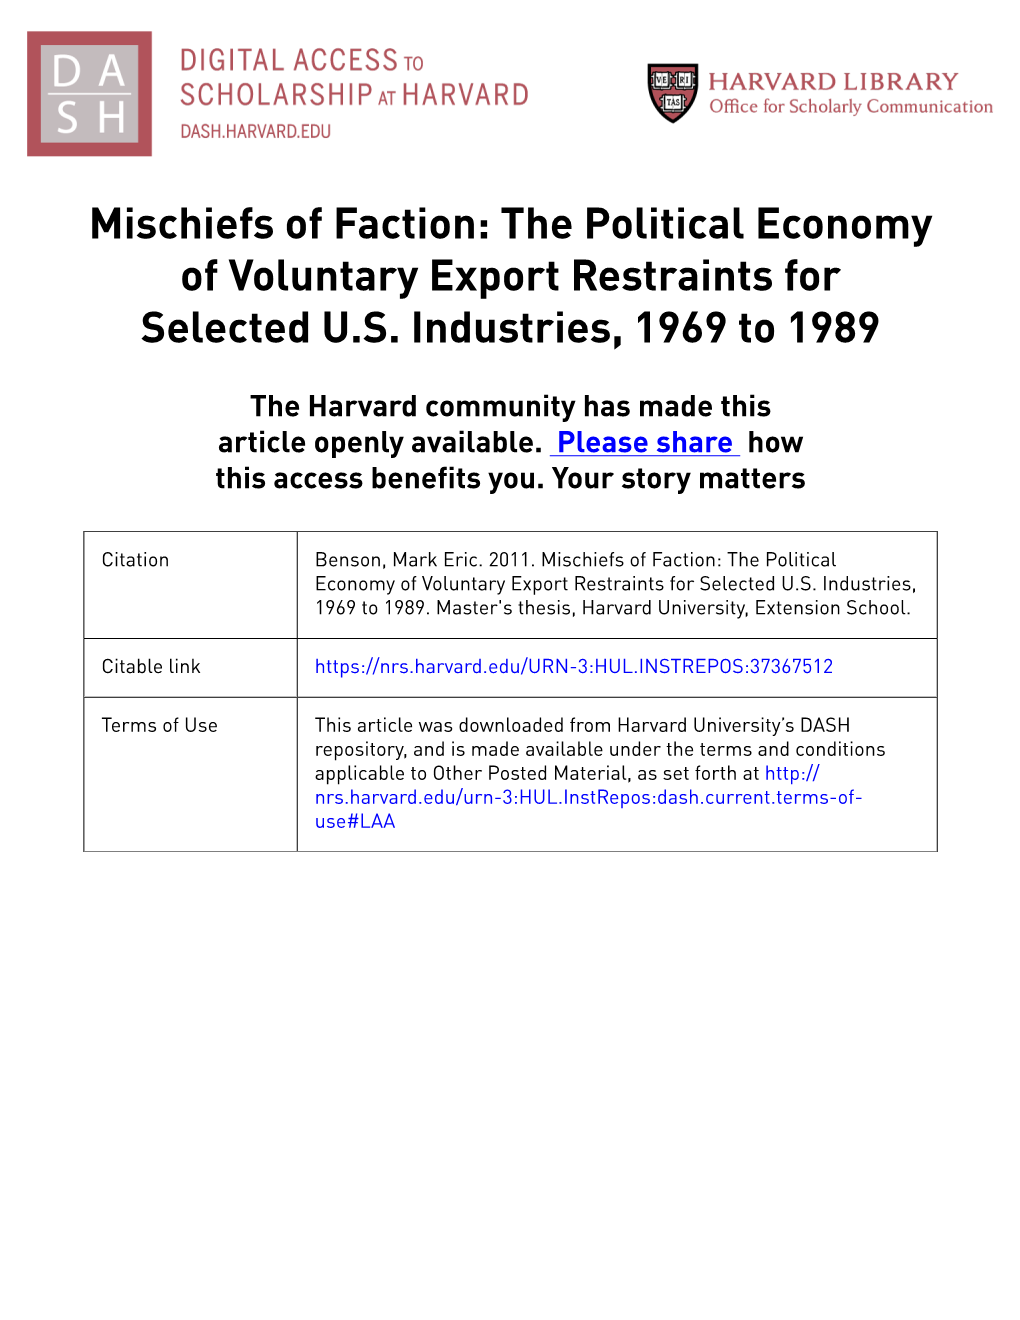 Mischiefs of Faction: the Political Economy of Voluntary Export Restraints for Selected U.S